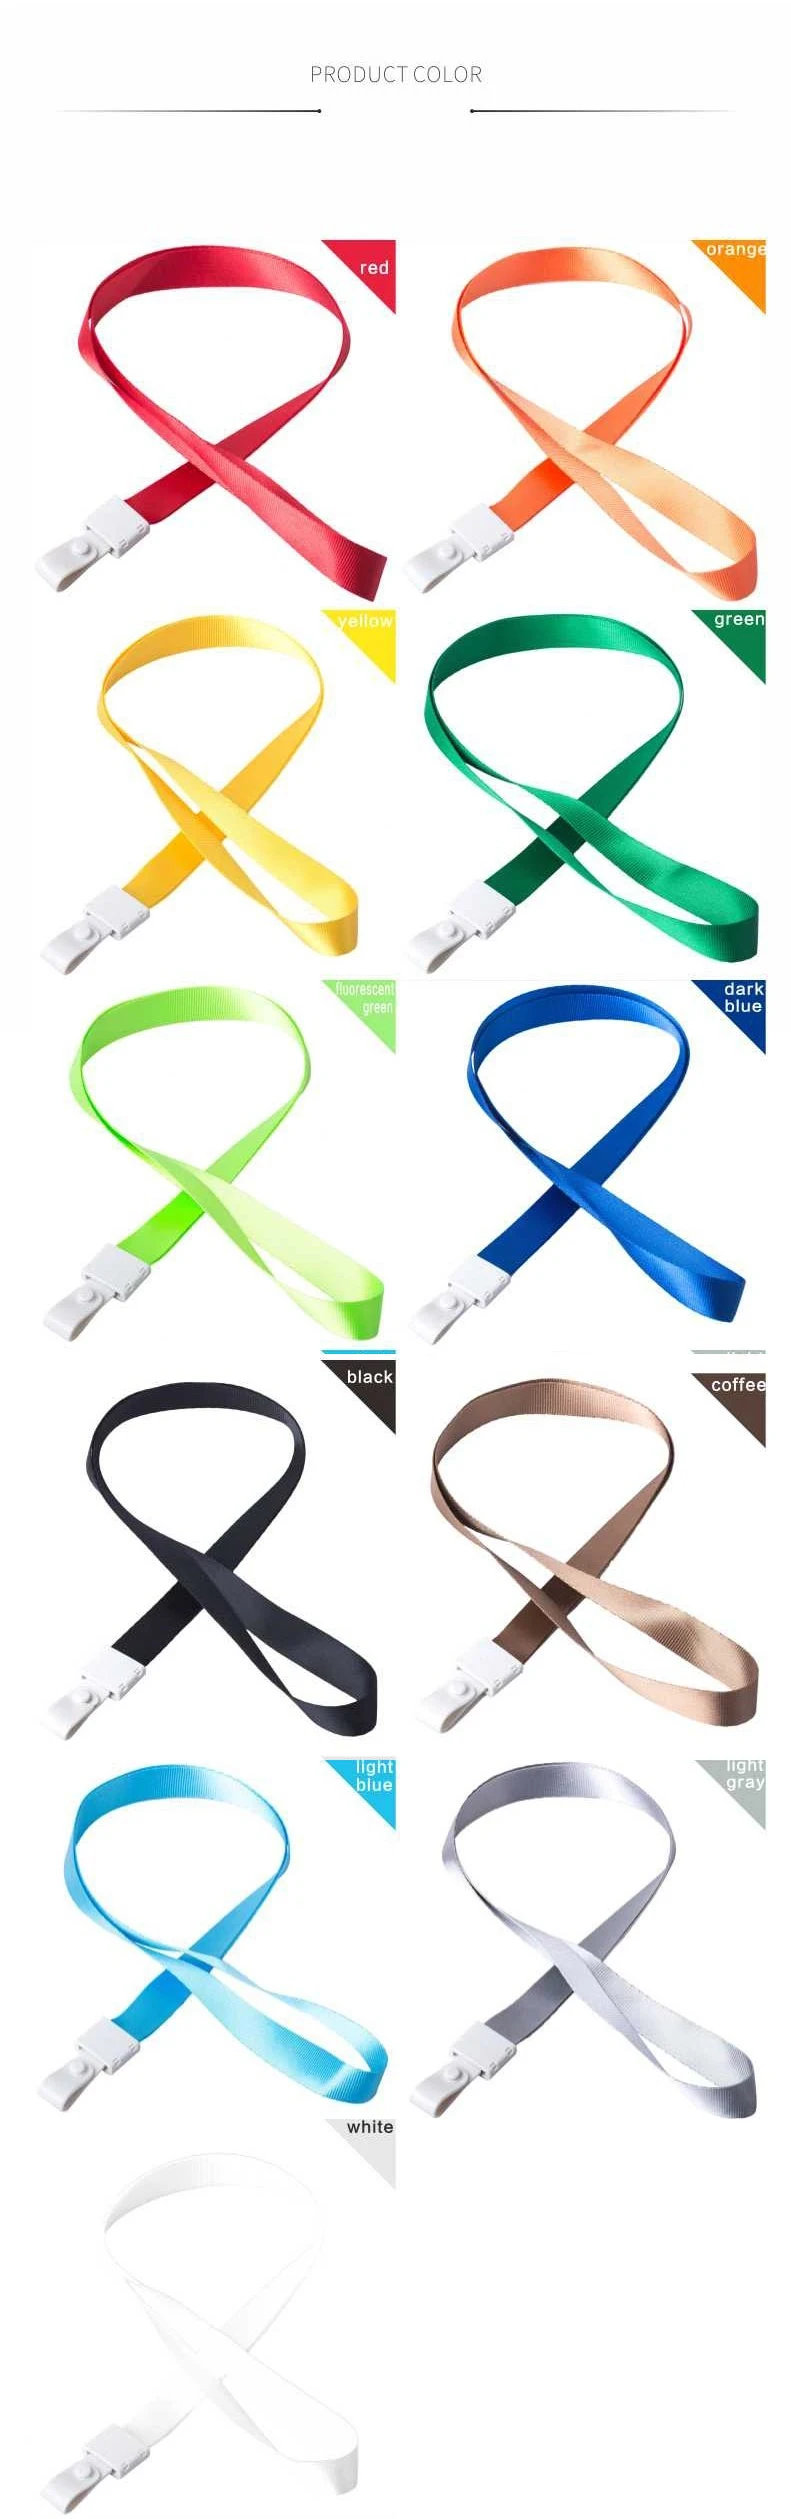 Reap 7723 Woven polyester Neck Lanyards/Straps/Strings Clip Attachment Office ID Name Tags Badge HolderLOGO CUSTOMIZE